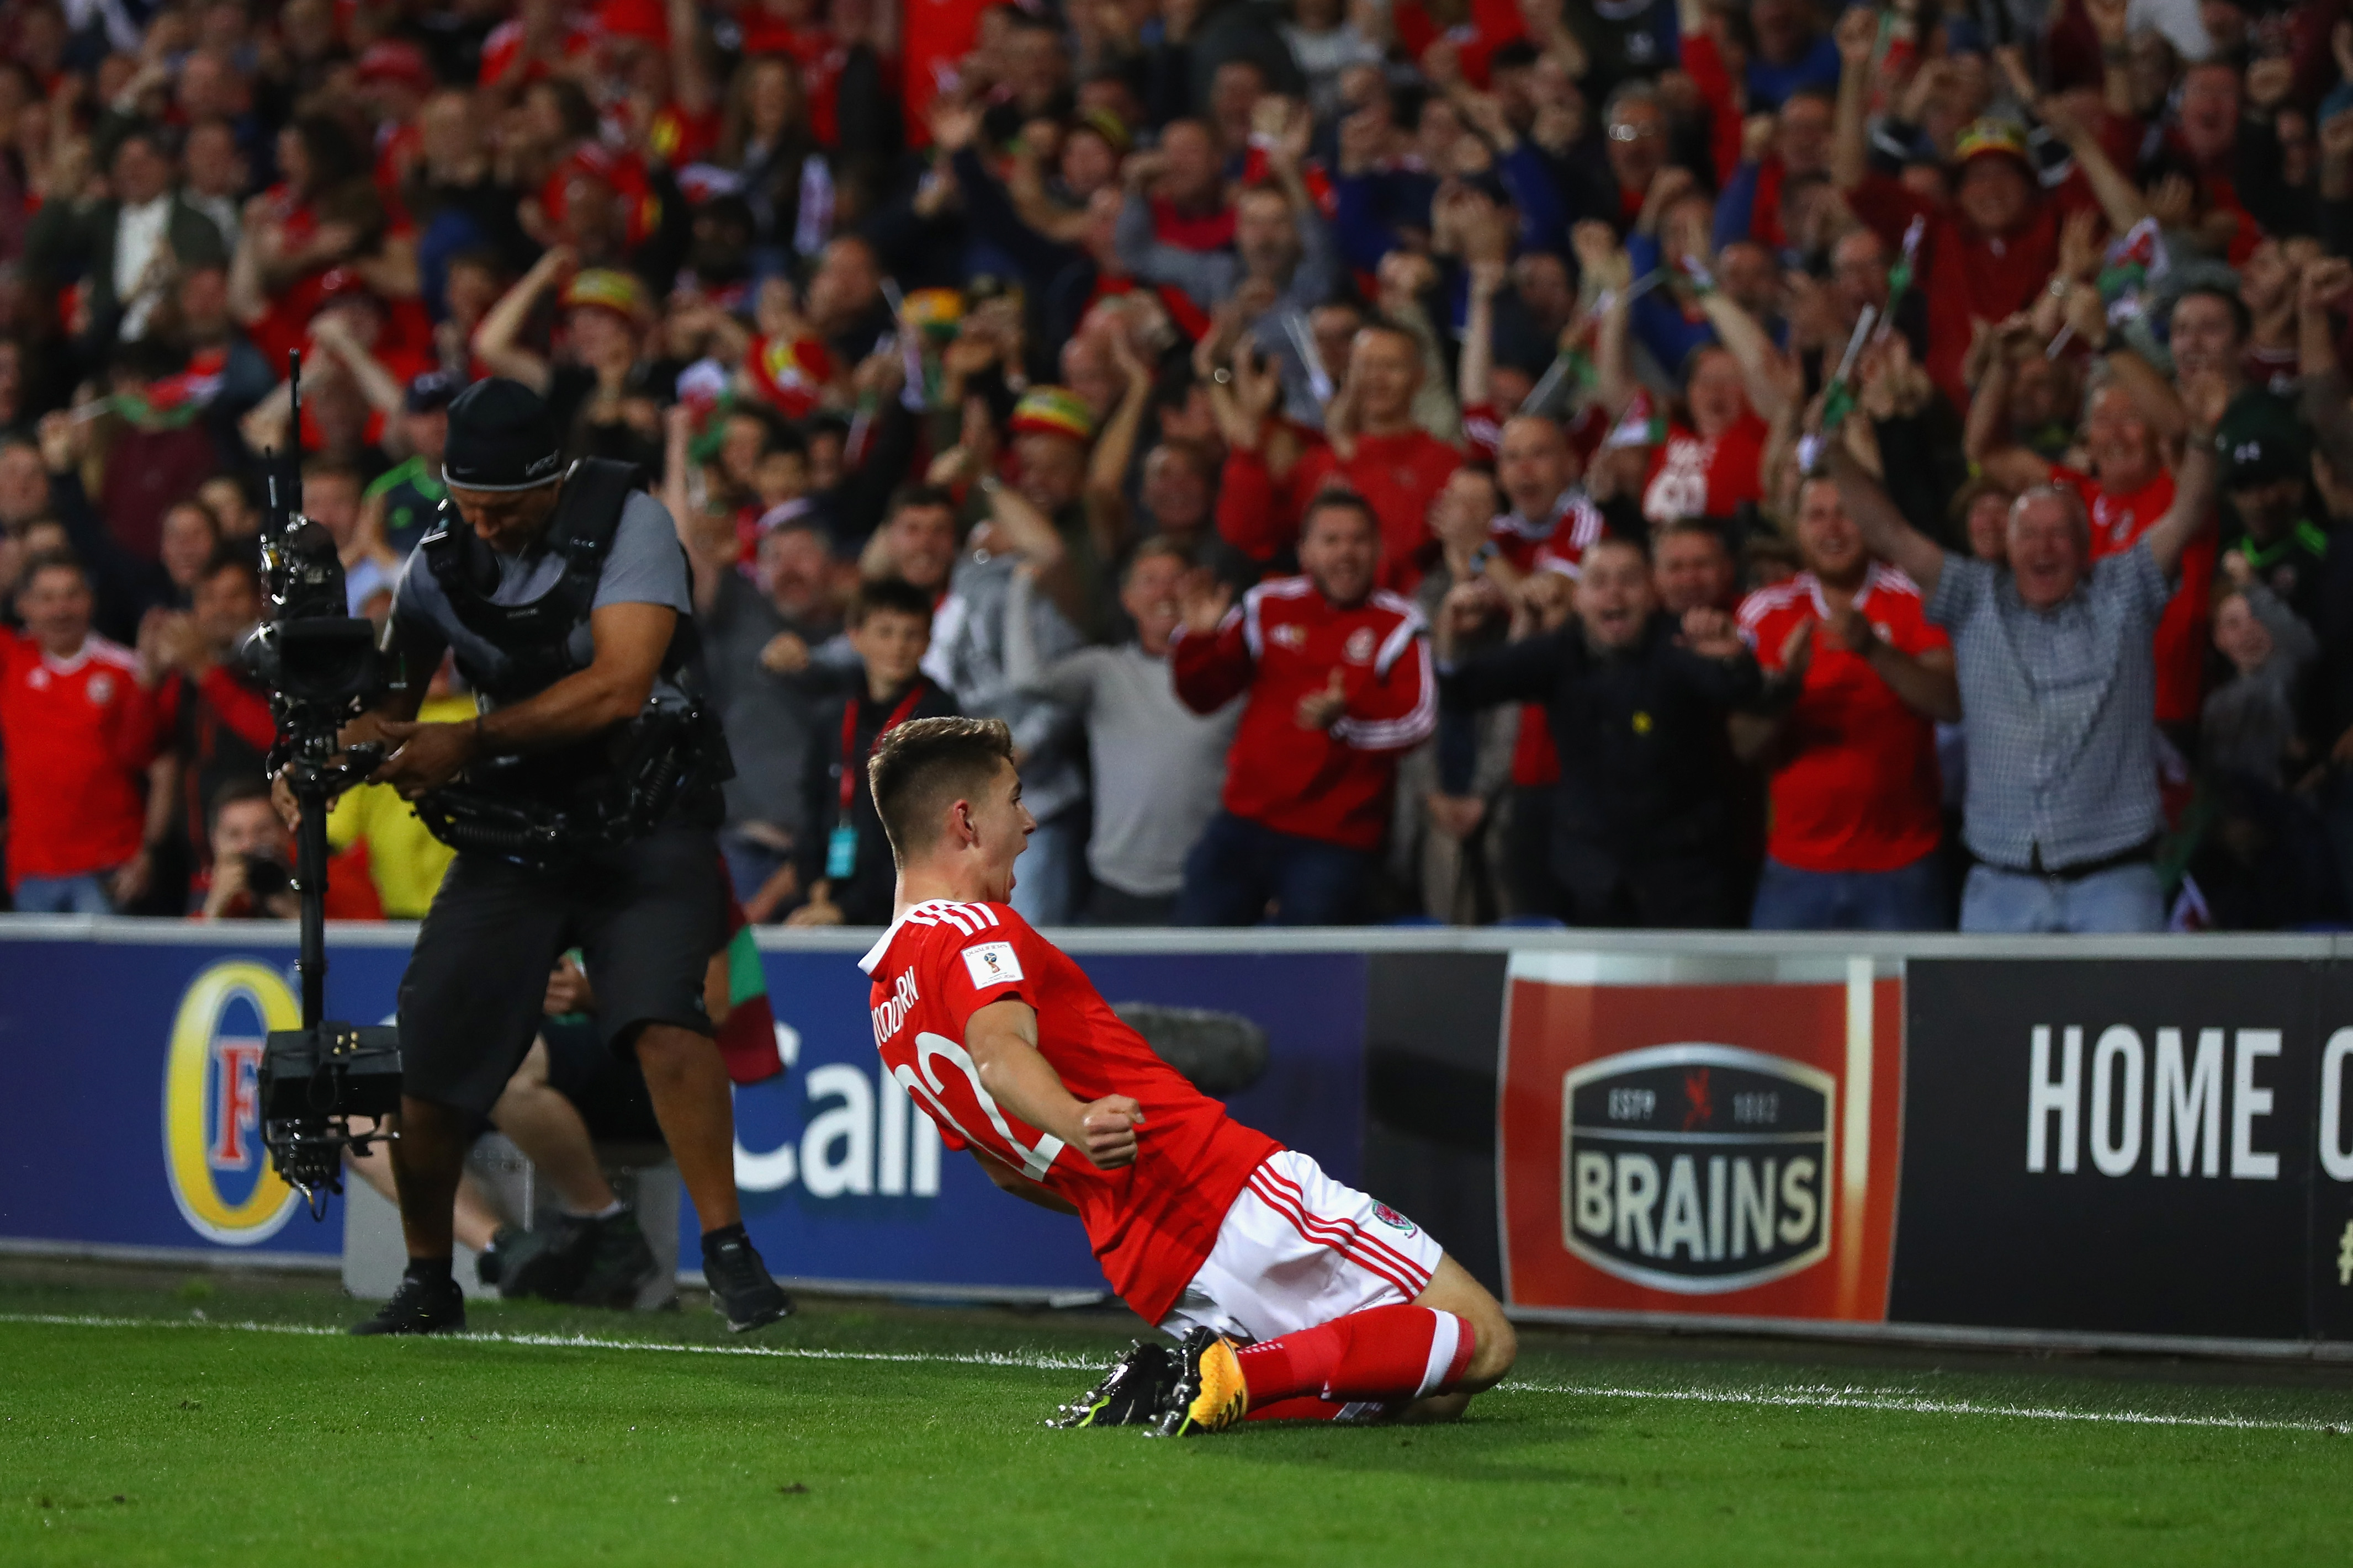 CARDIFF, WALES - SEPTEMBER 02:  Ben Woodburn of Wales celebrates scoring the winning goal during the FIFA 2018 World Cup Qualifier Group D match between Wales and Austria at Cardiff City Stadium on September 2, 2017 in Cardiff, Wales.  (Photo by Michael Steele/Getty Images)